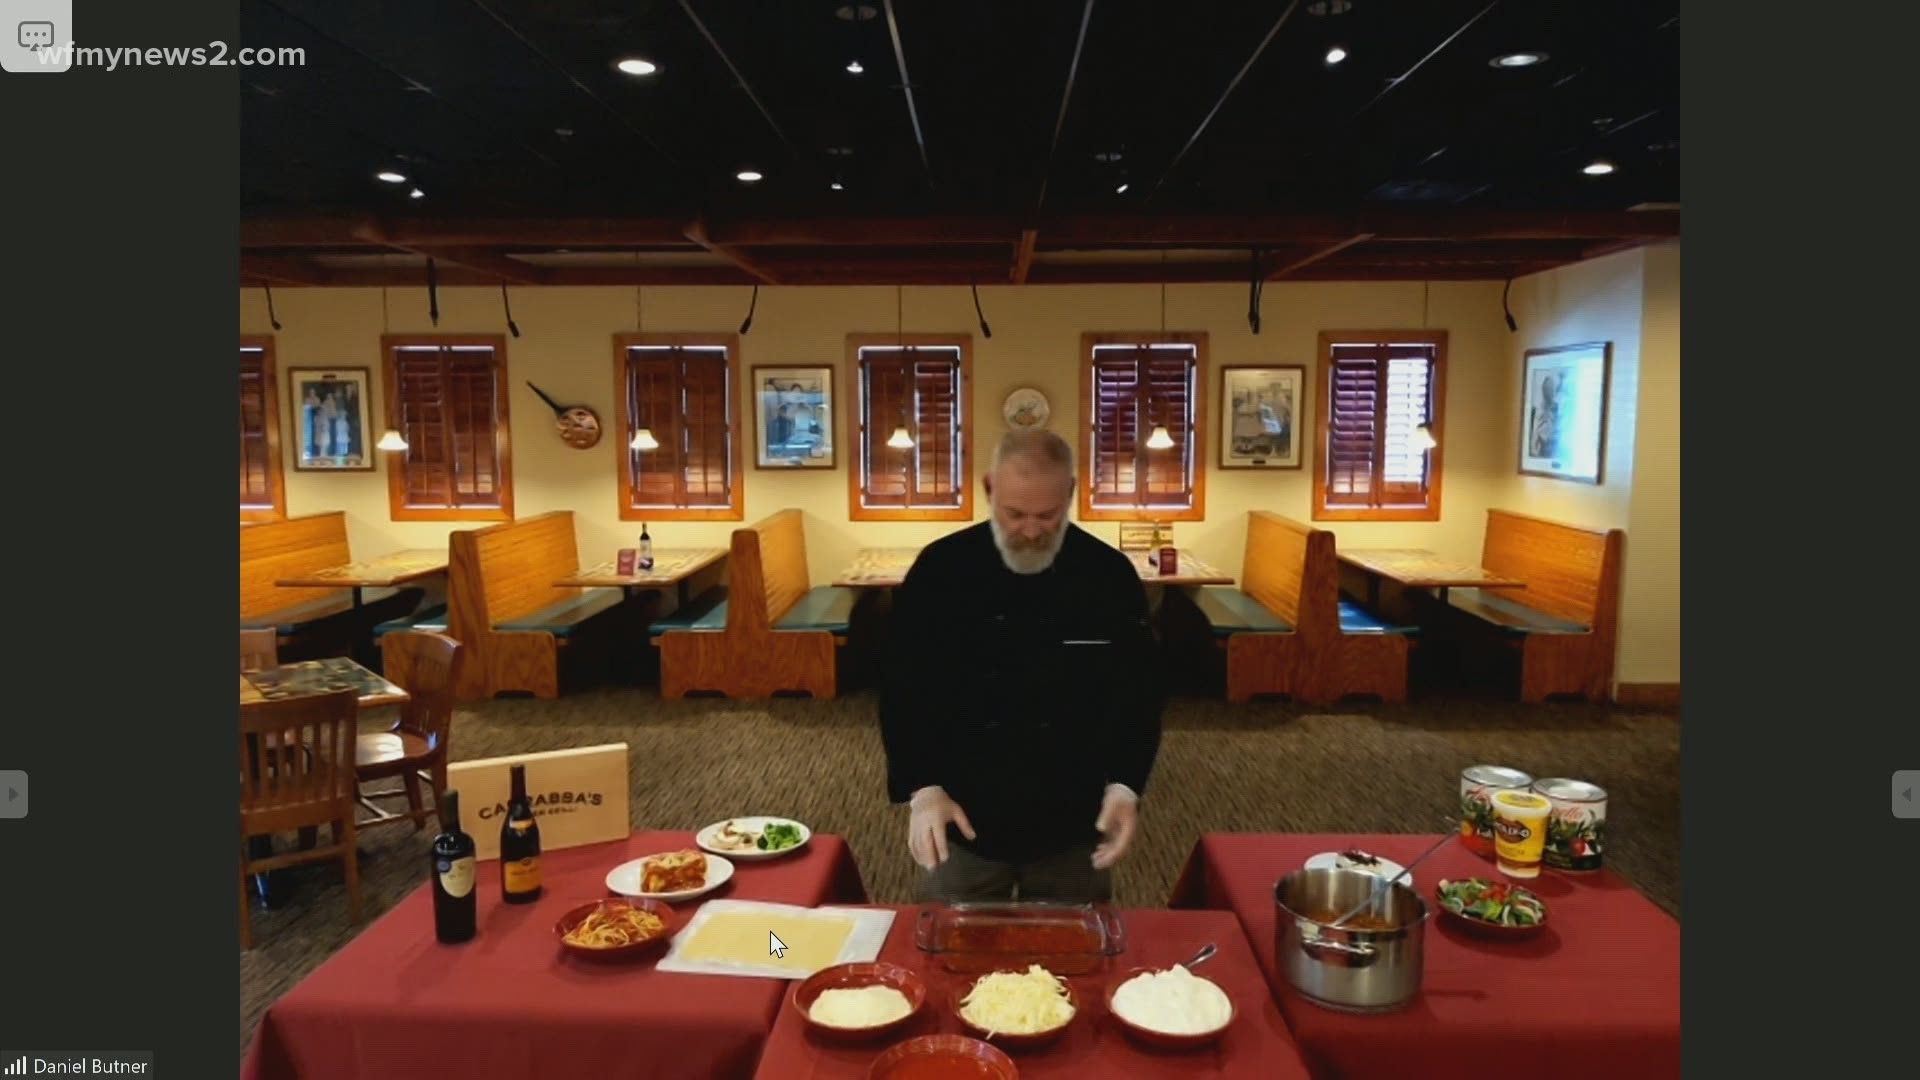 Chef Daniel Butner from Carrabba's Italian Grill joins us virtually with the recipe for a perfect homemade lasagna.